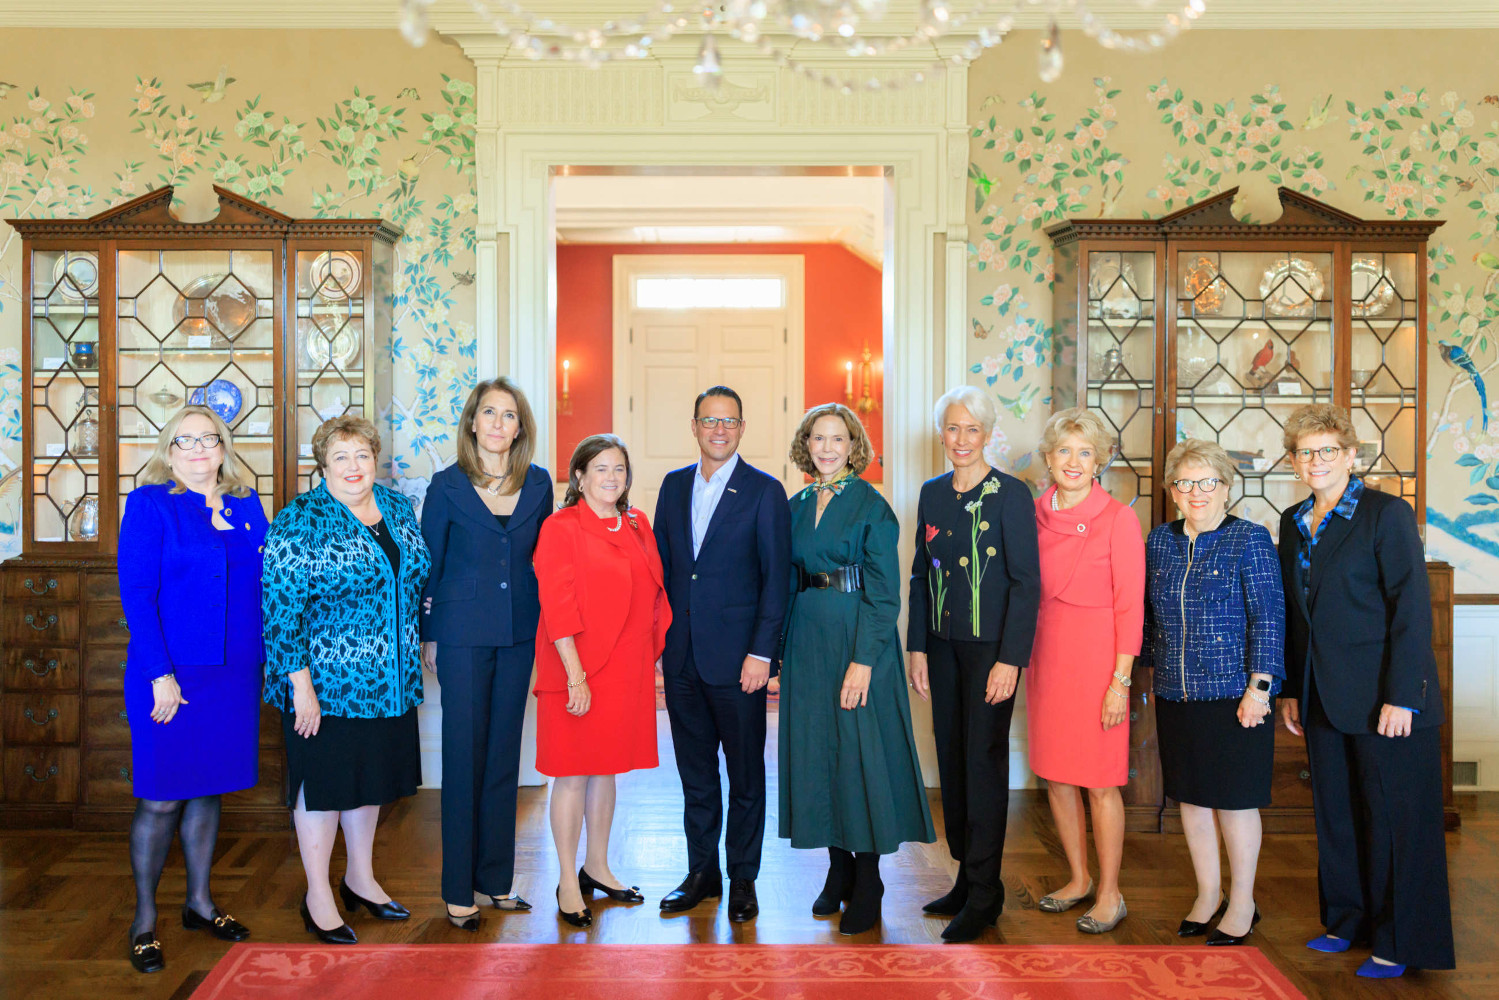 Photo of the 2023 class of inductees into the Distinguished Daughters of Pennsylvania. They women are being photographed with Governor Josh Shapiro. Kim Phipps is second from the left.